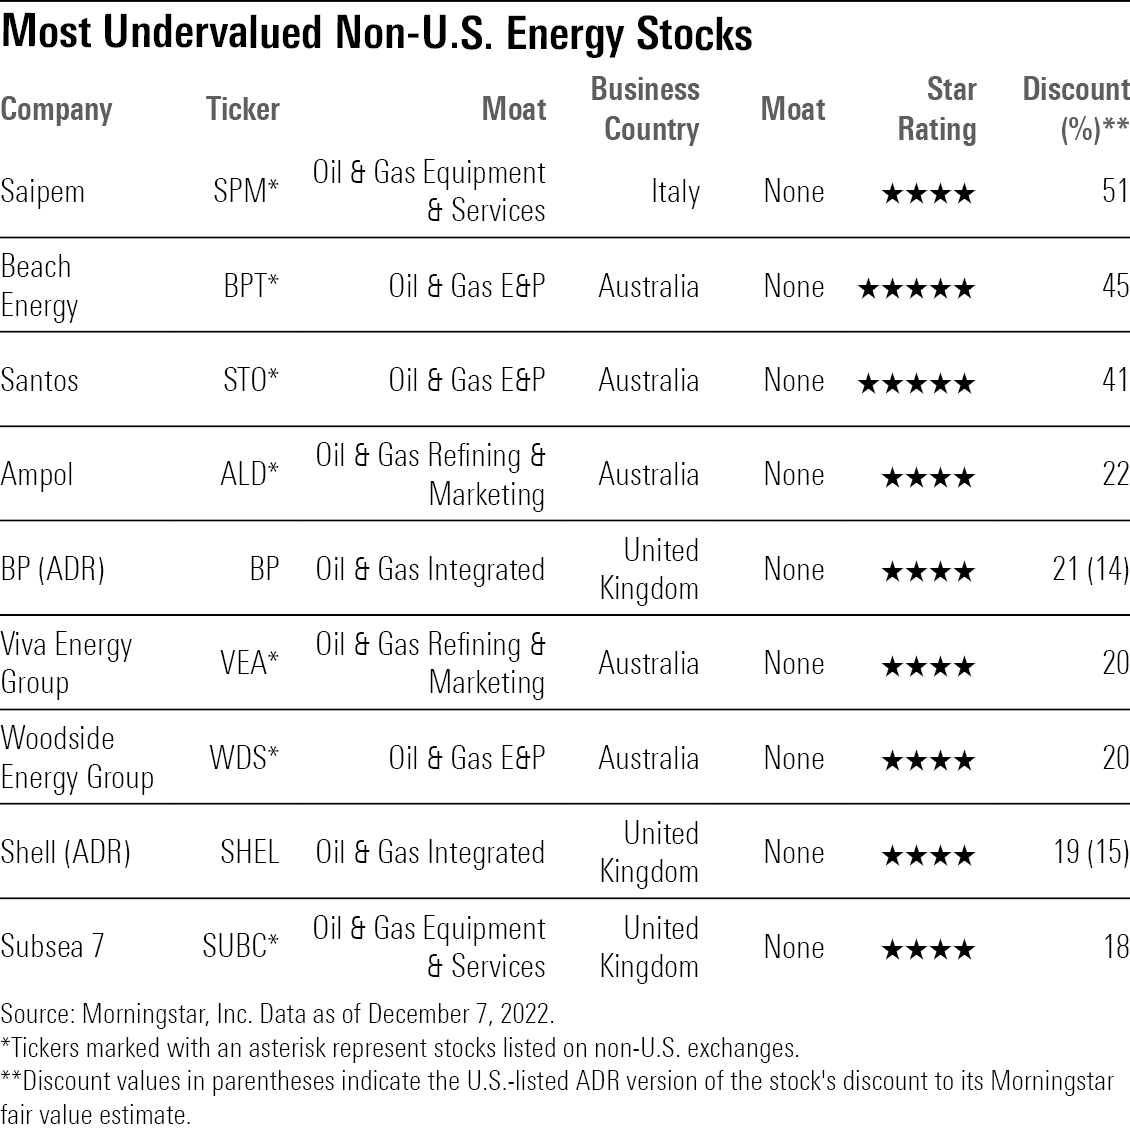 A table showing the most undervalued energy stocks that are based outside the United States.